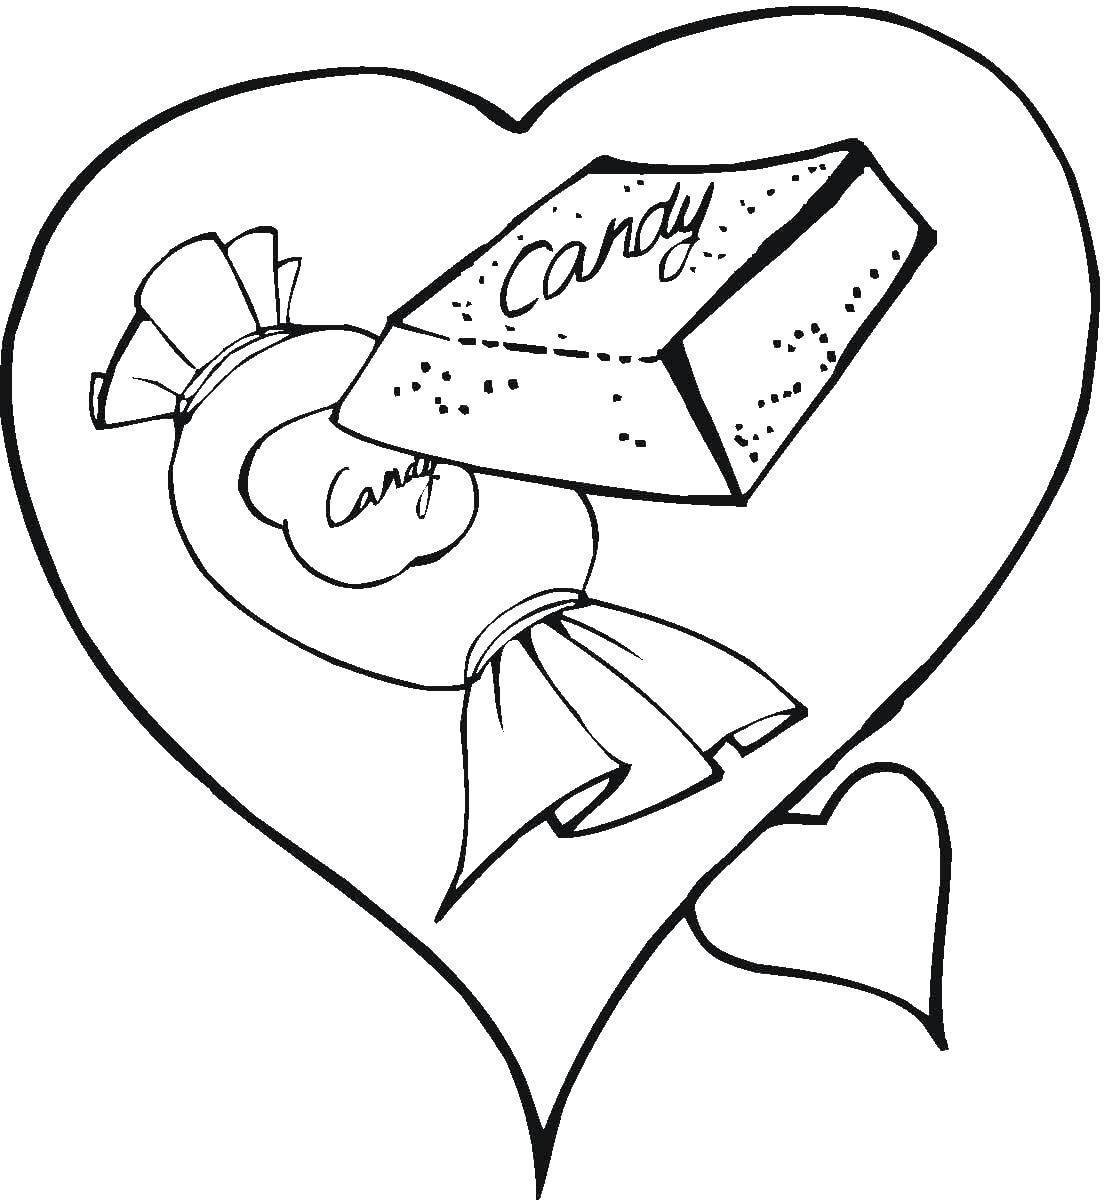 Coloring Heart and candy. Category Hearts. Tags:  heart, love, candy.